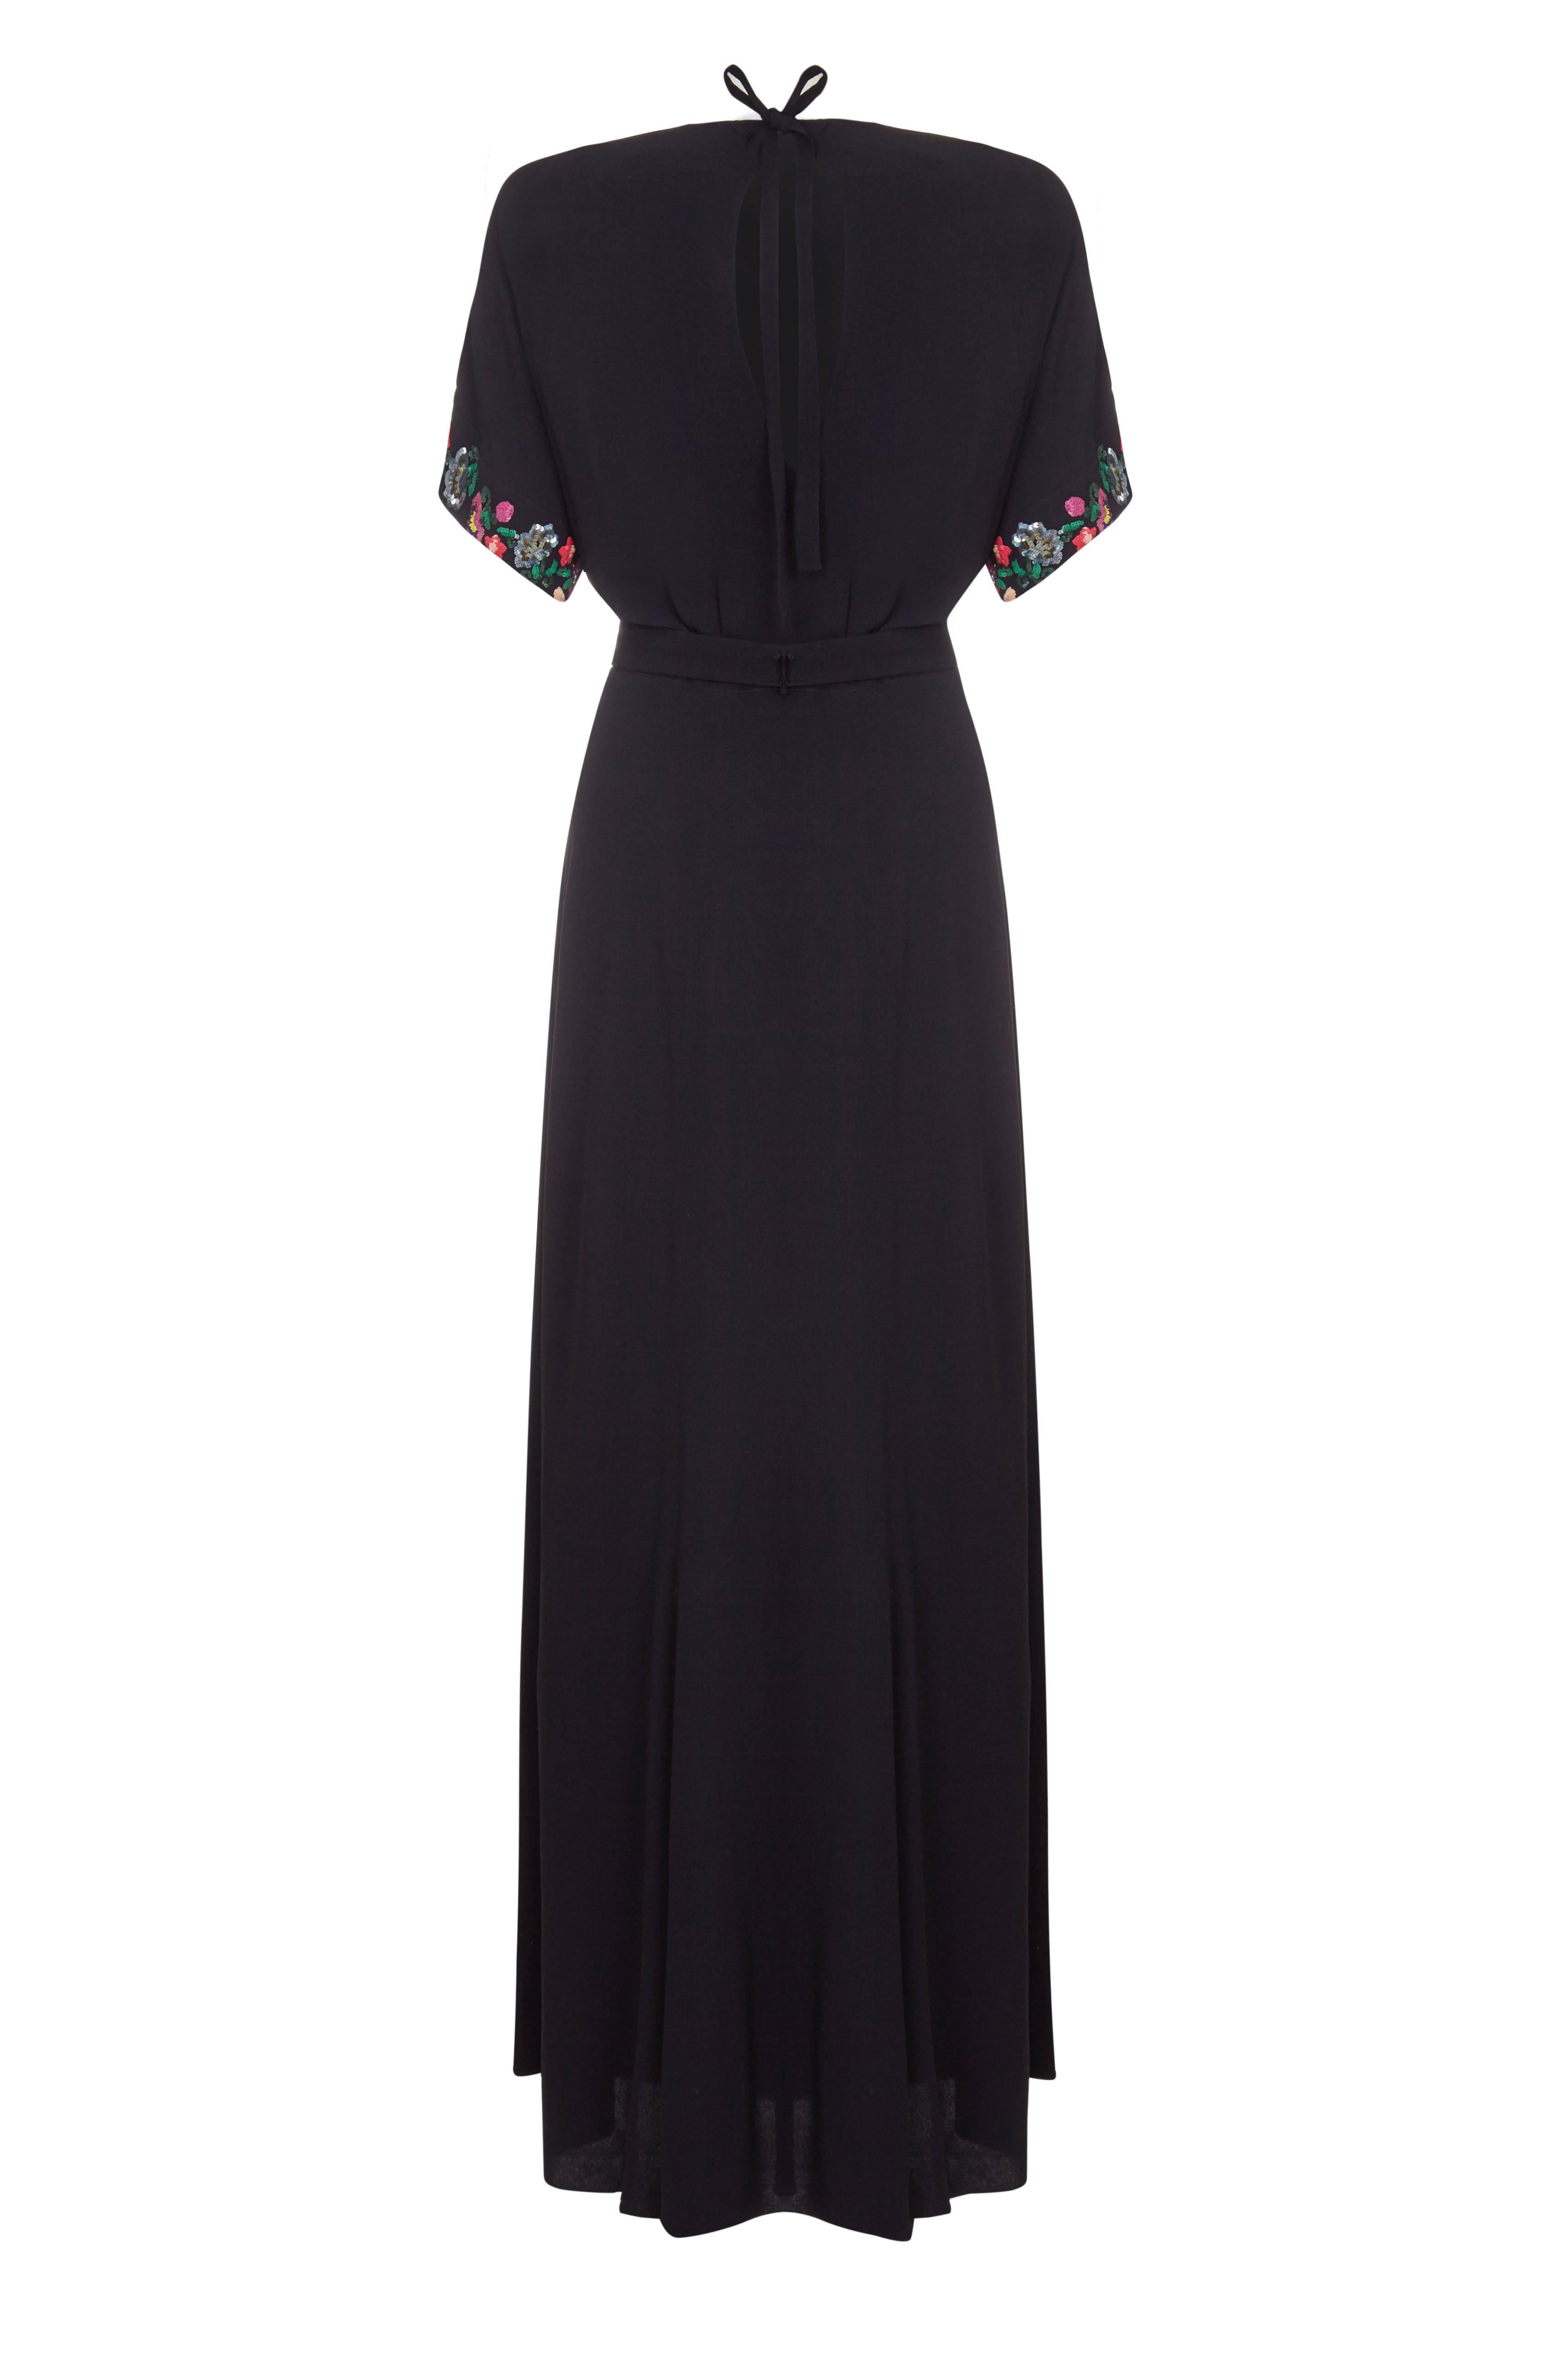 Amazing vintage 1940s full length black crepe dress with lovely multi-coloured floral sequin design on the sleeves and front of the attached belt.  This beautiful piece has flattering seams cut in to the skirt, and open back that ties at the neck